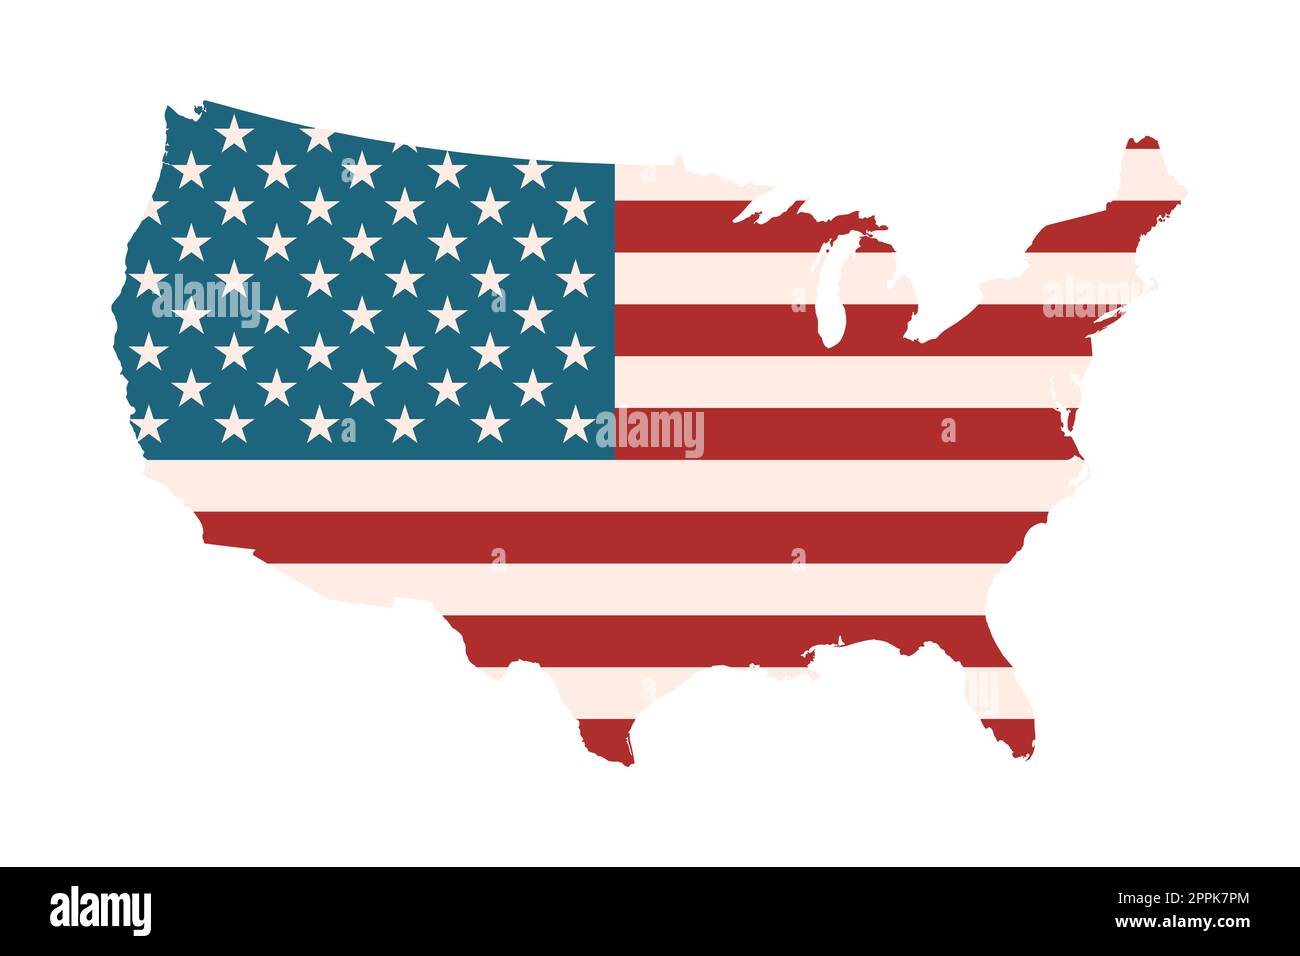 USA map with American flag. National symbol of United States of America. Graphic print design element. Isolated on white background. Vintage colors. Stock Vector